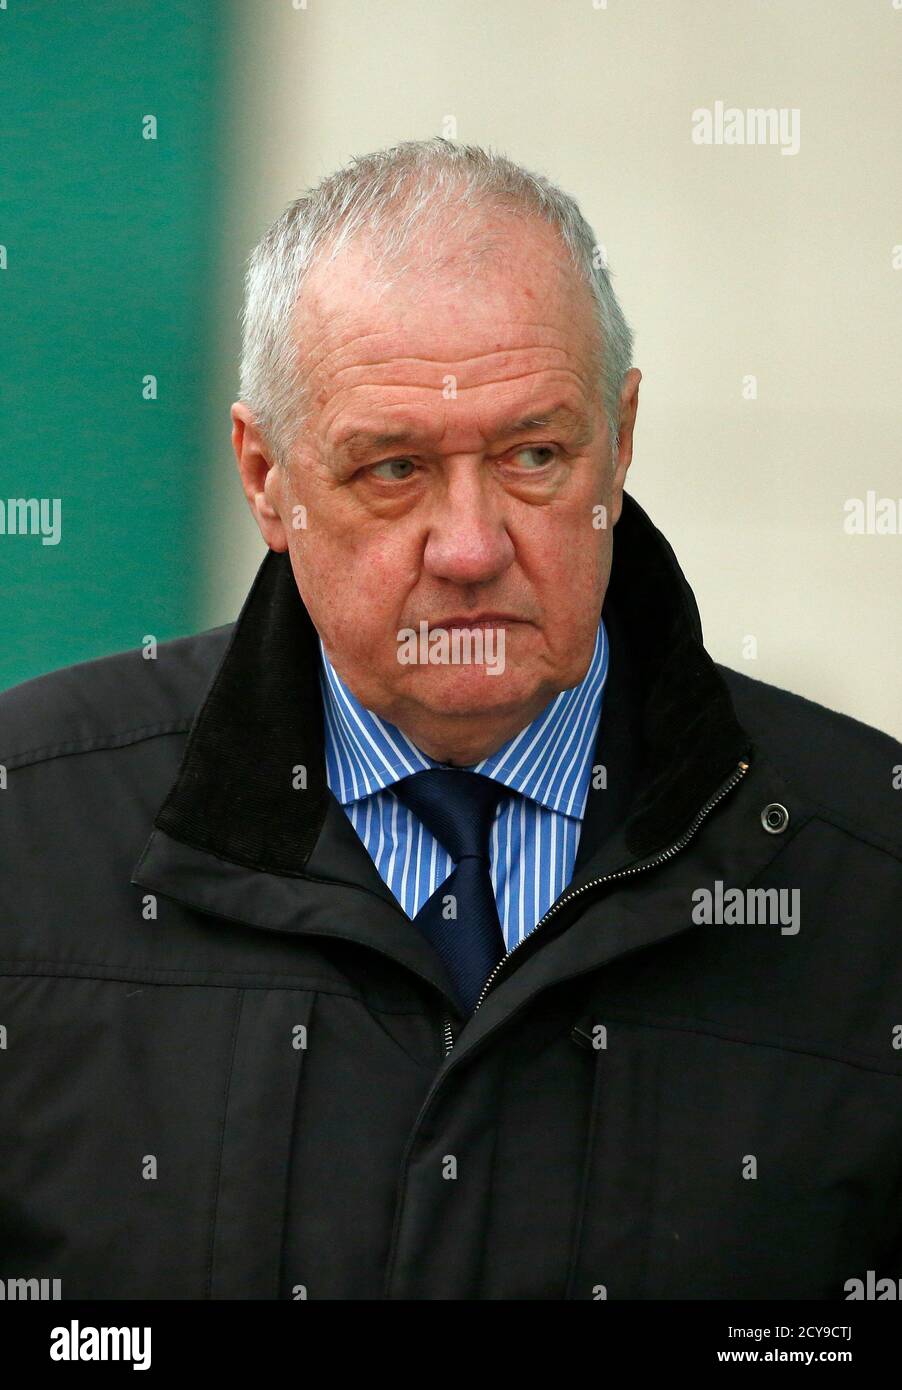 Former Chief Superintendent of South Yorkshire Police, David Duckenfield, leaves after giving evidence to the Hillsborough Inquest in Warrington, northern England March 12, 2015. Duckenfield was match commander at the 1989 Hillsborough disaster, that claimed the lives of 96 men, women and children.   REUTERS/Phil Noble (BRITAIN  - Tags: CRIME LAW SPORT SOCCER) Stock Photo